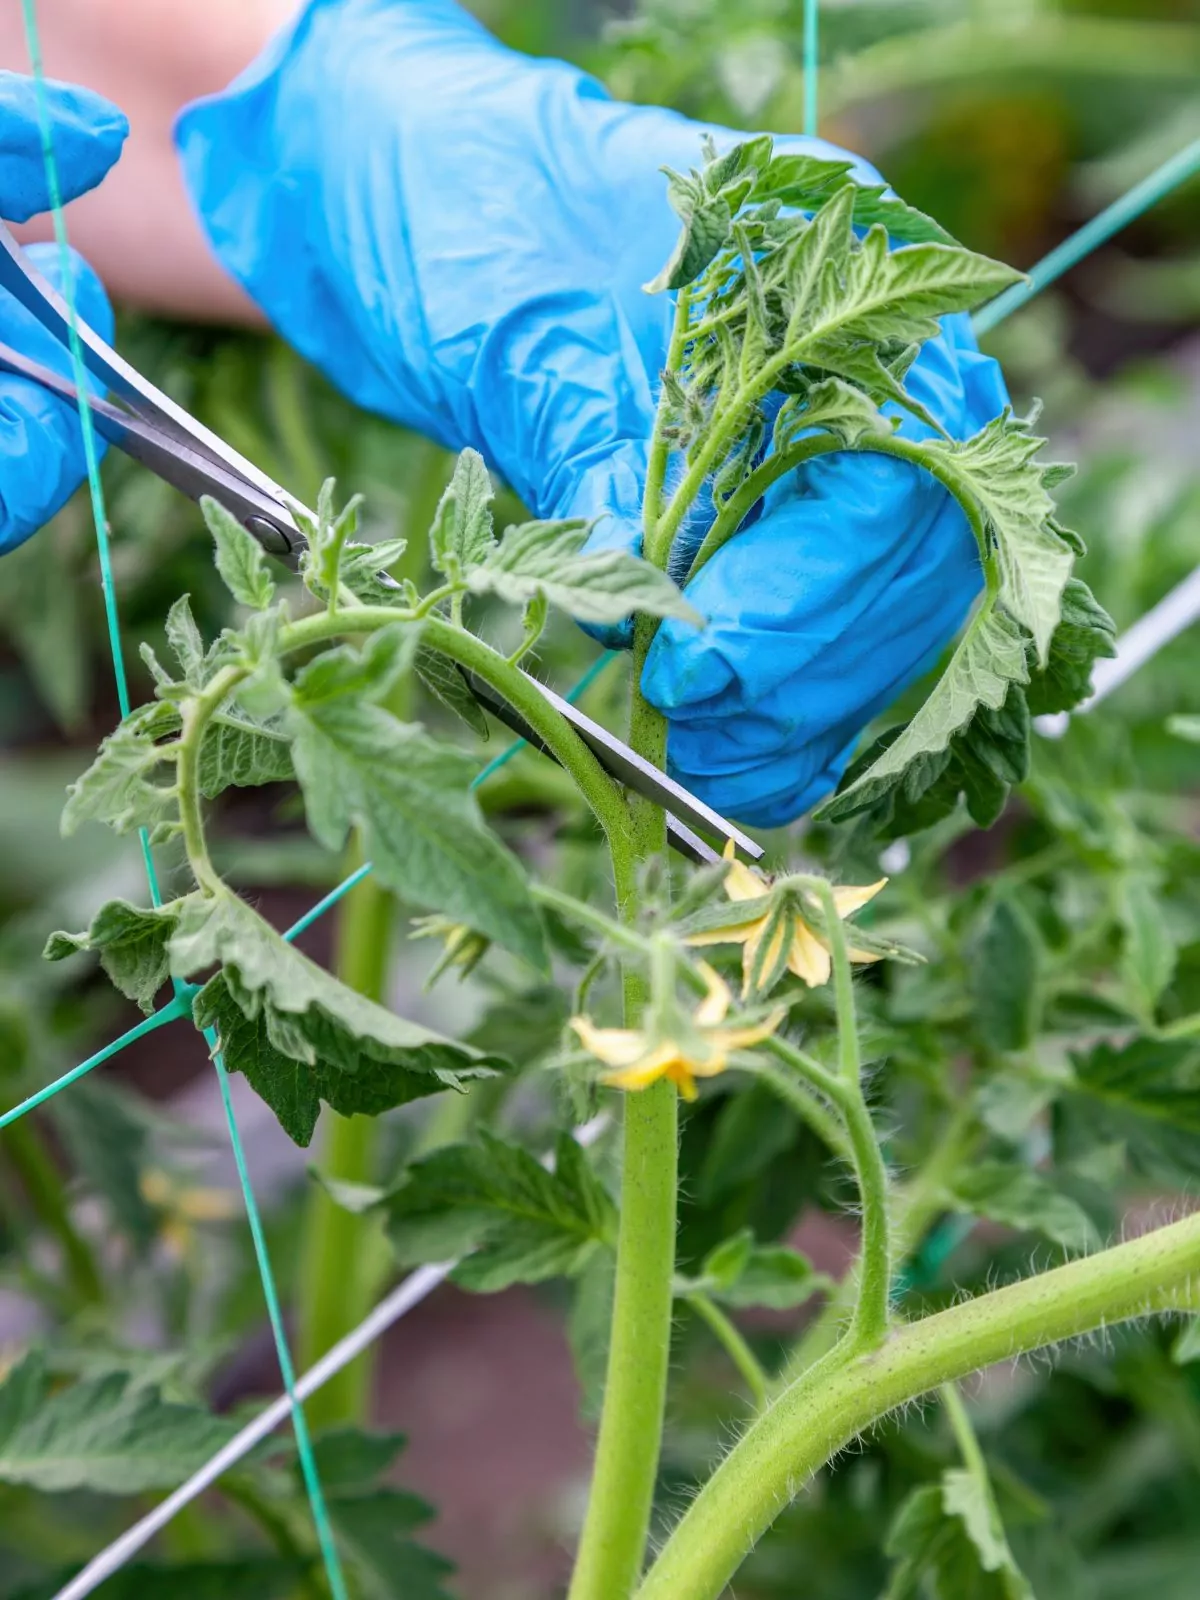 pruning tomatoes with shears and blue plastic gloves.